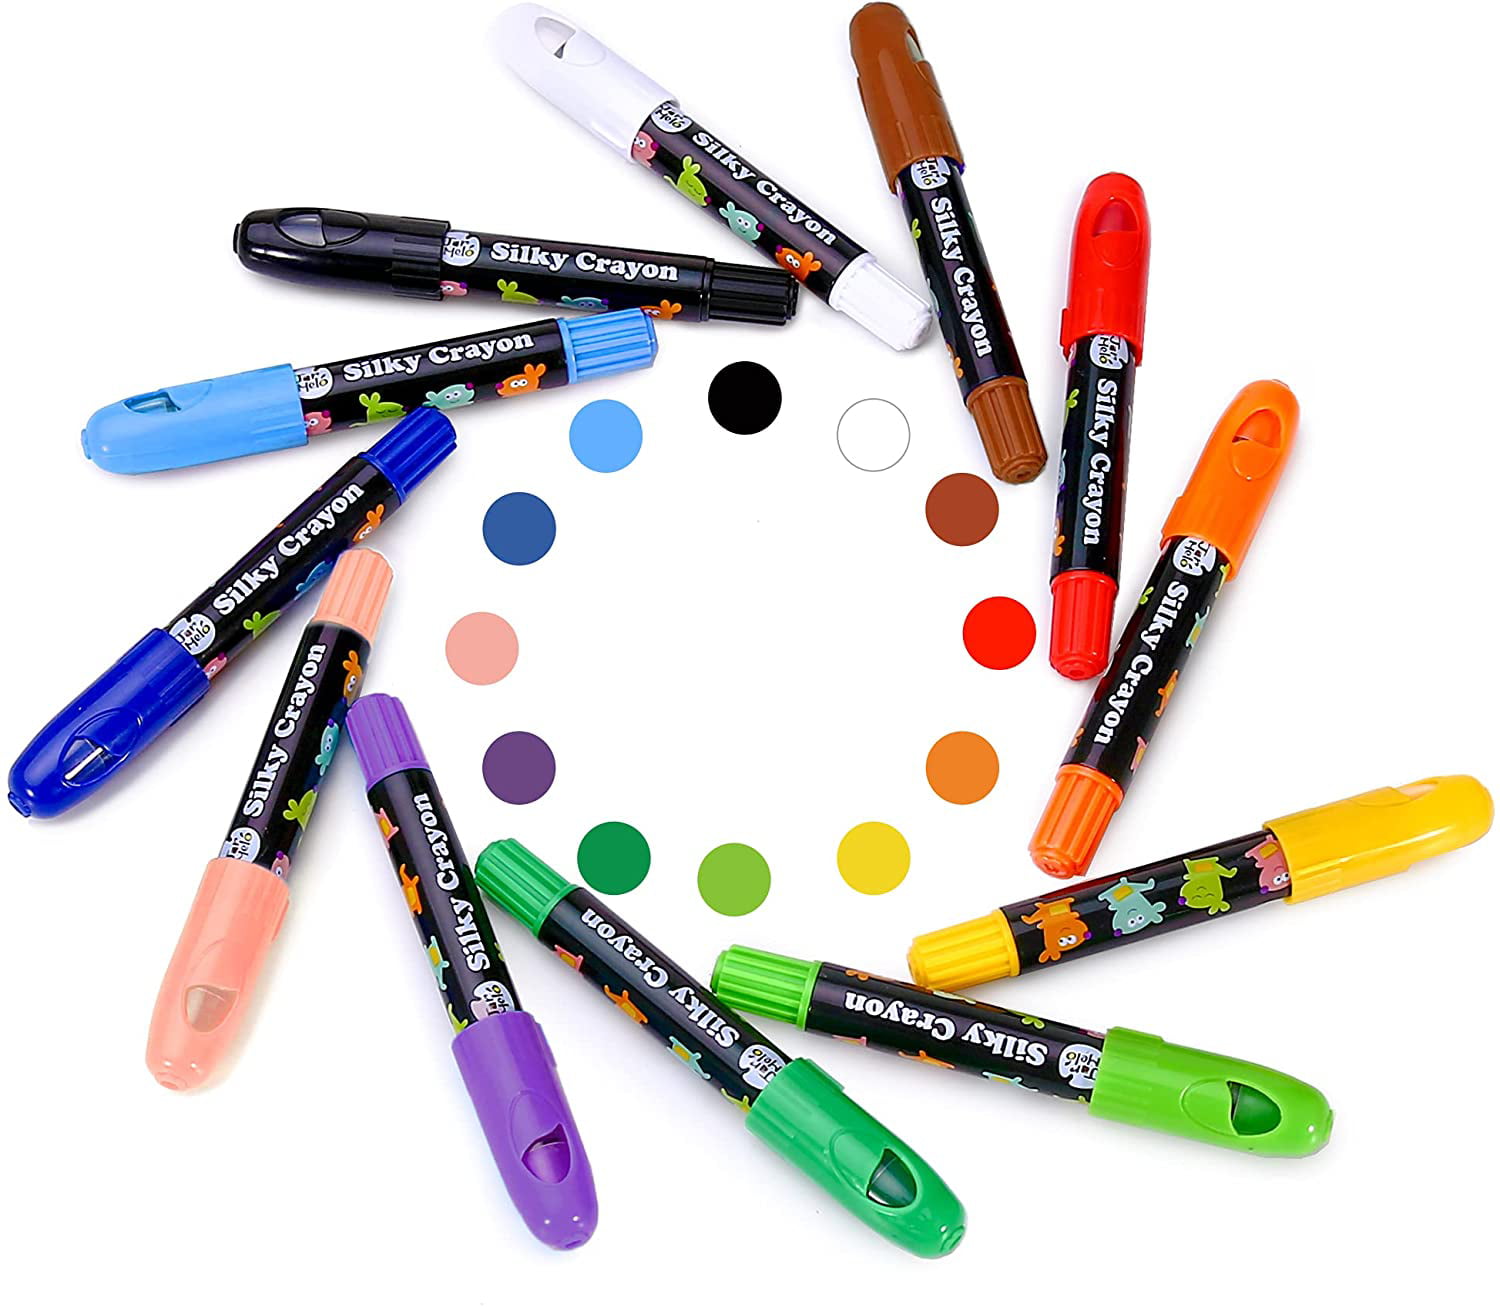 Crayon-Pastel-Watercolor ; Coloring Gift for Kids; Art Tools; Twistable Slick Crayons; Big Size; Jumbo;Christmas Gift Jar Melo Silky Crayons-36 Colors Washable Rotating Non-Toxic 3 in 1 Effect 